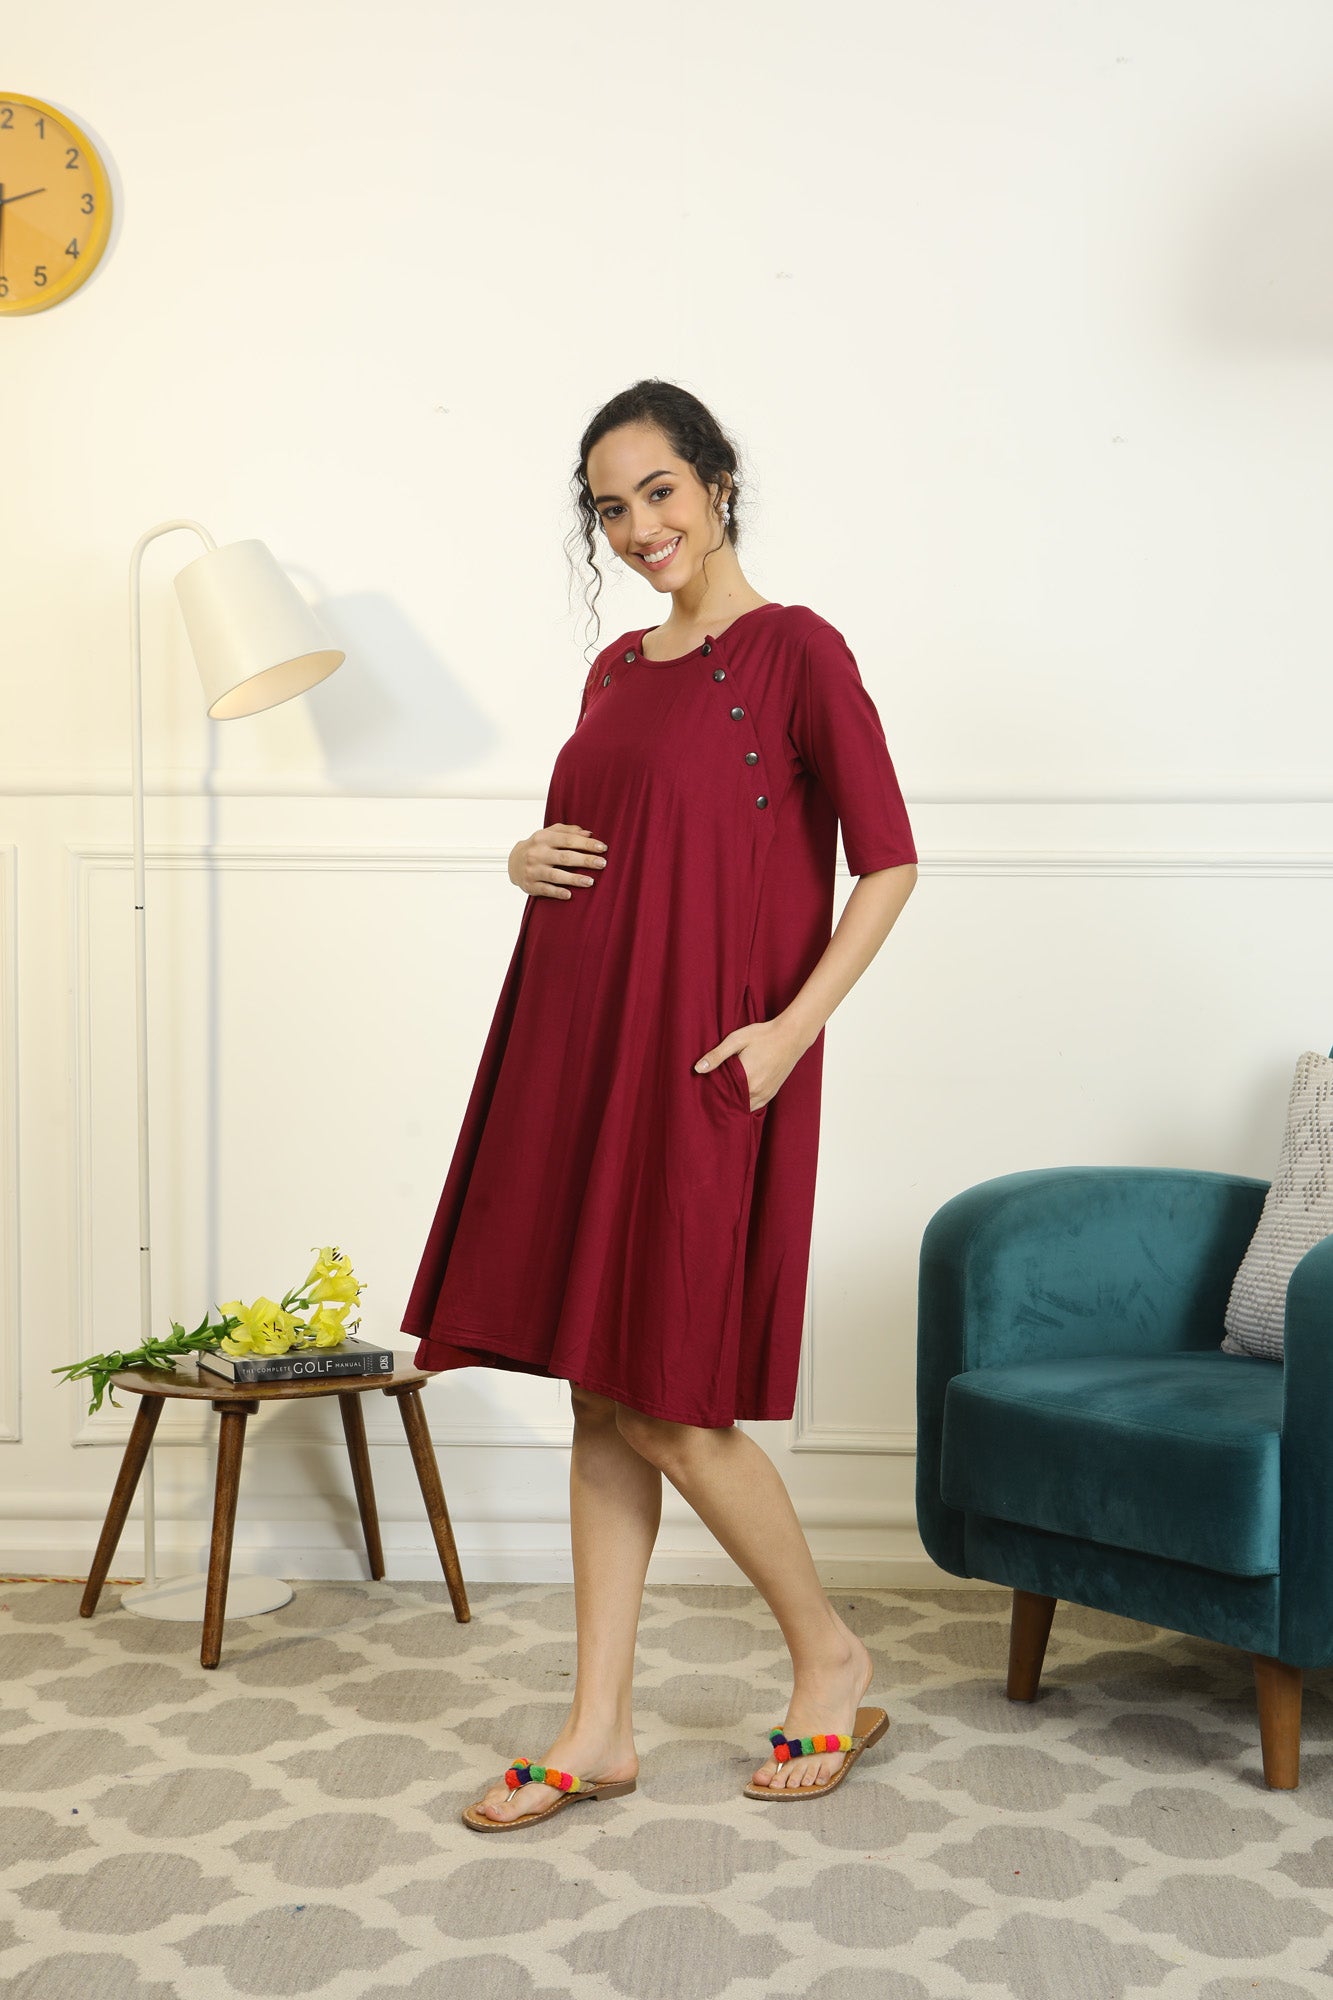 50% off Maternity Clothes! TMOYZQ Women's Elegant Fitted Off Shoulder  Maternity Dress Plus Size Long Bell Sleeves Formal Gowns for  Photoshoot/Baby